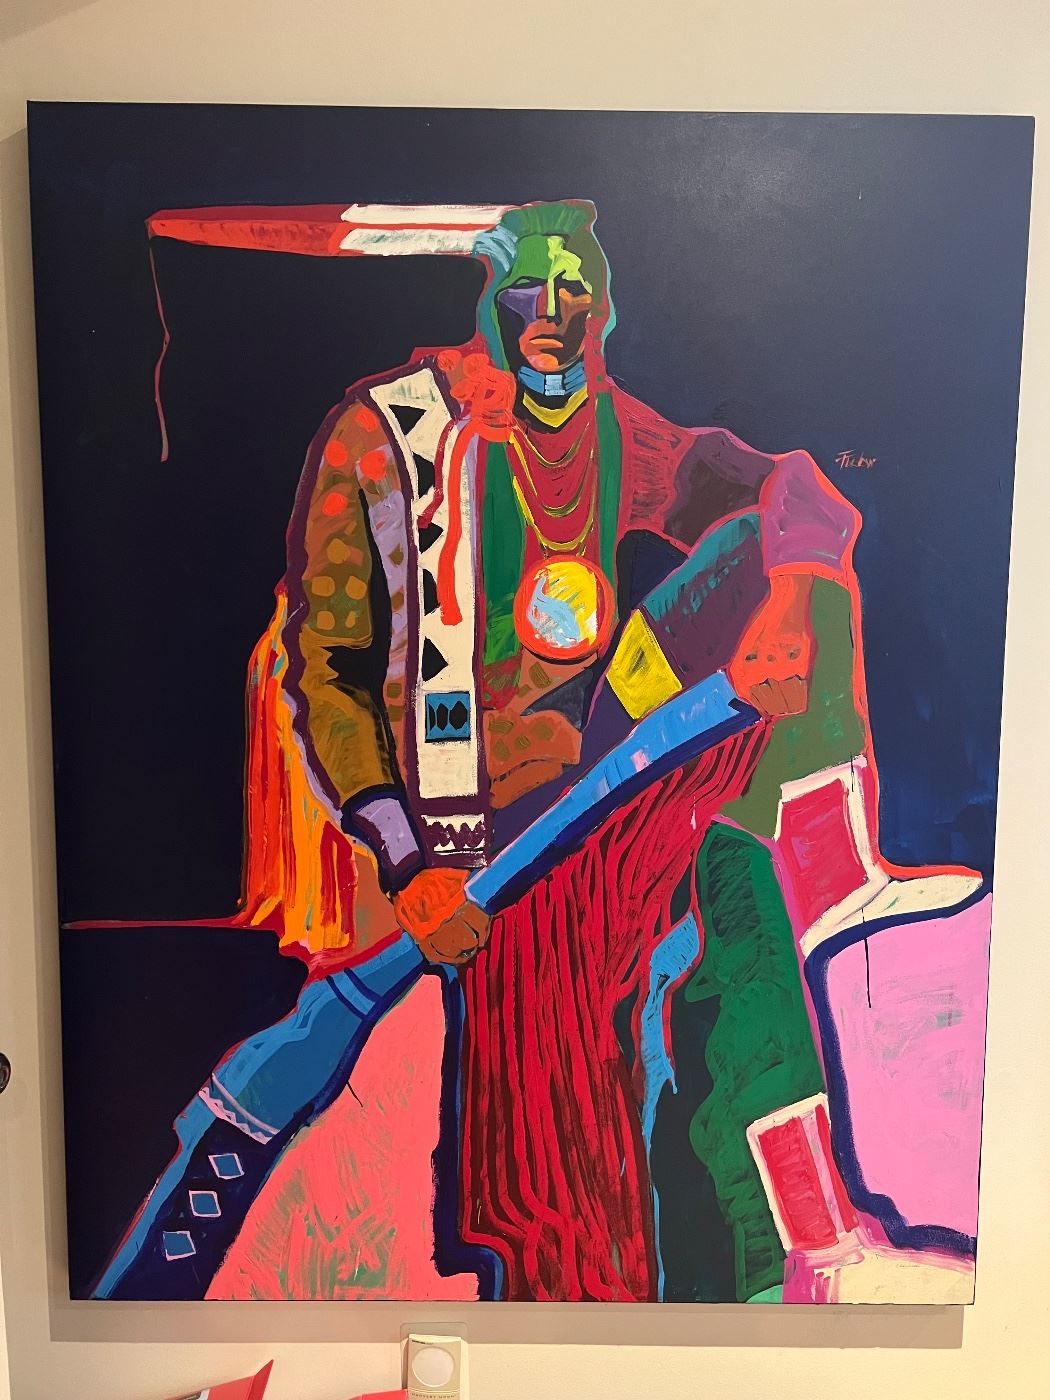 Native American Original Acrylic on Canvas Signed by Malcolm Furlow (58"L x 46"W)